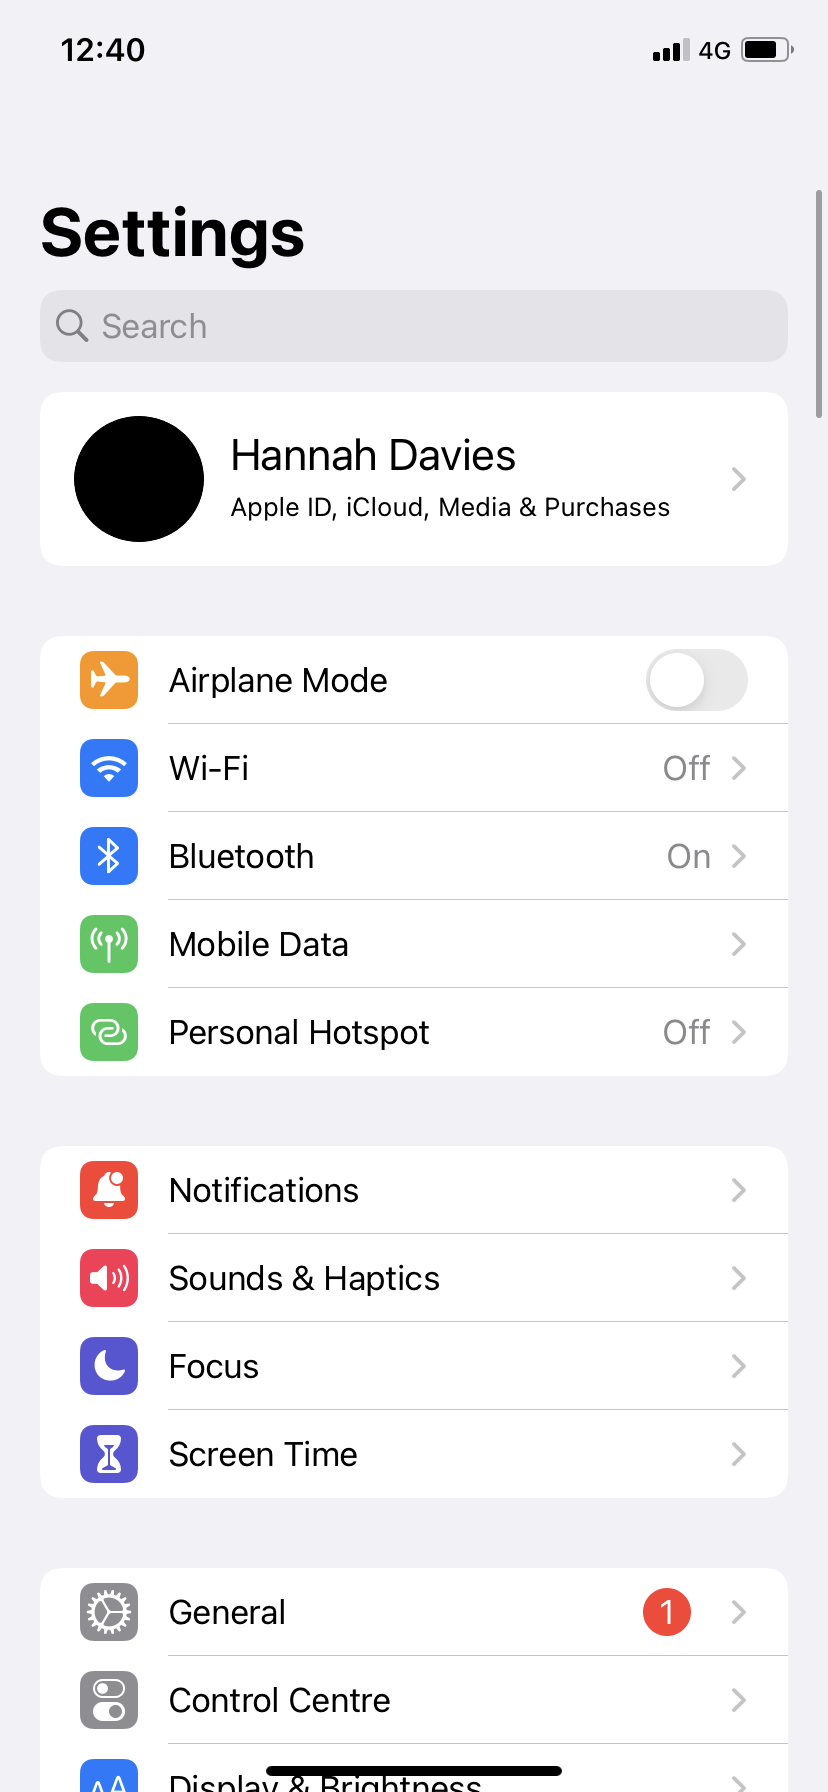 how to set up ios family sharing